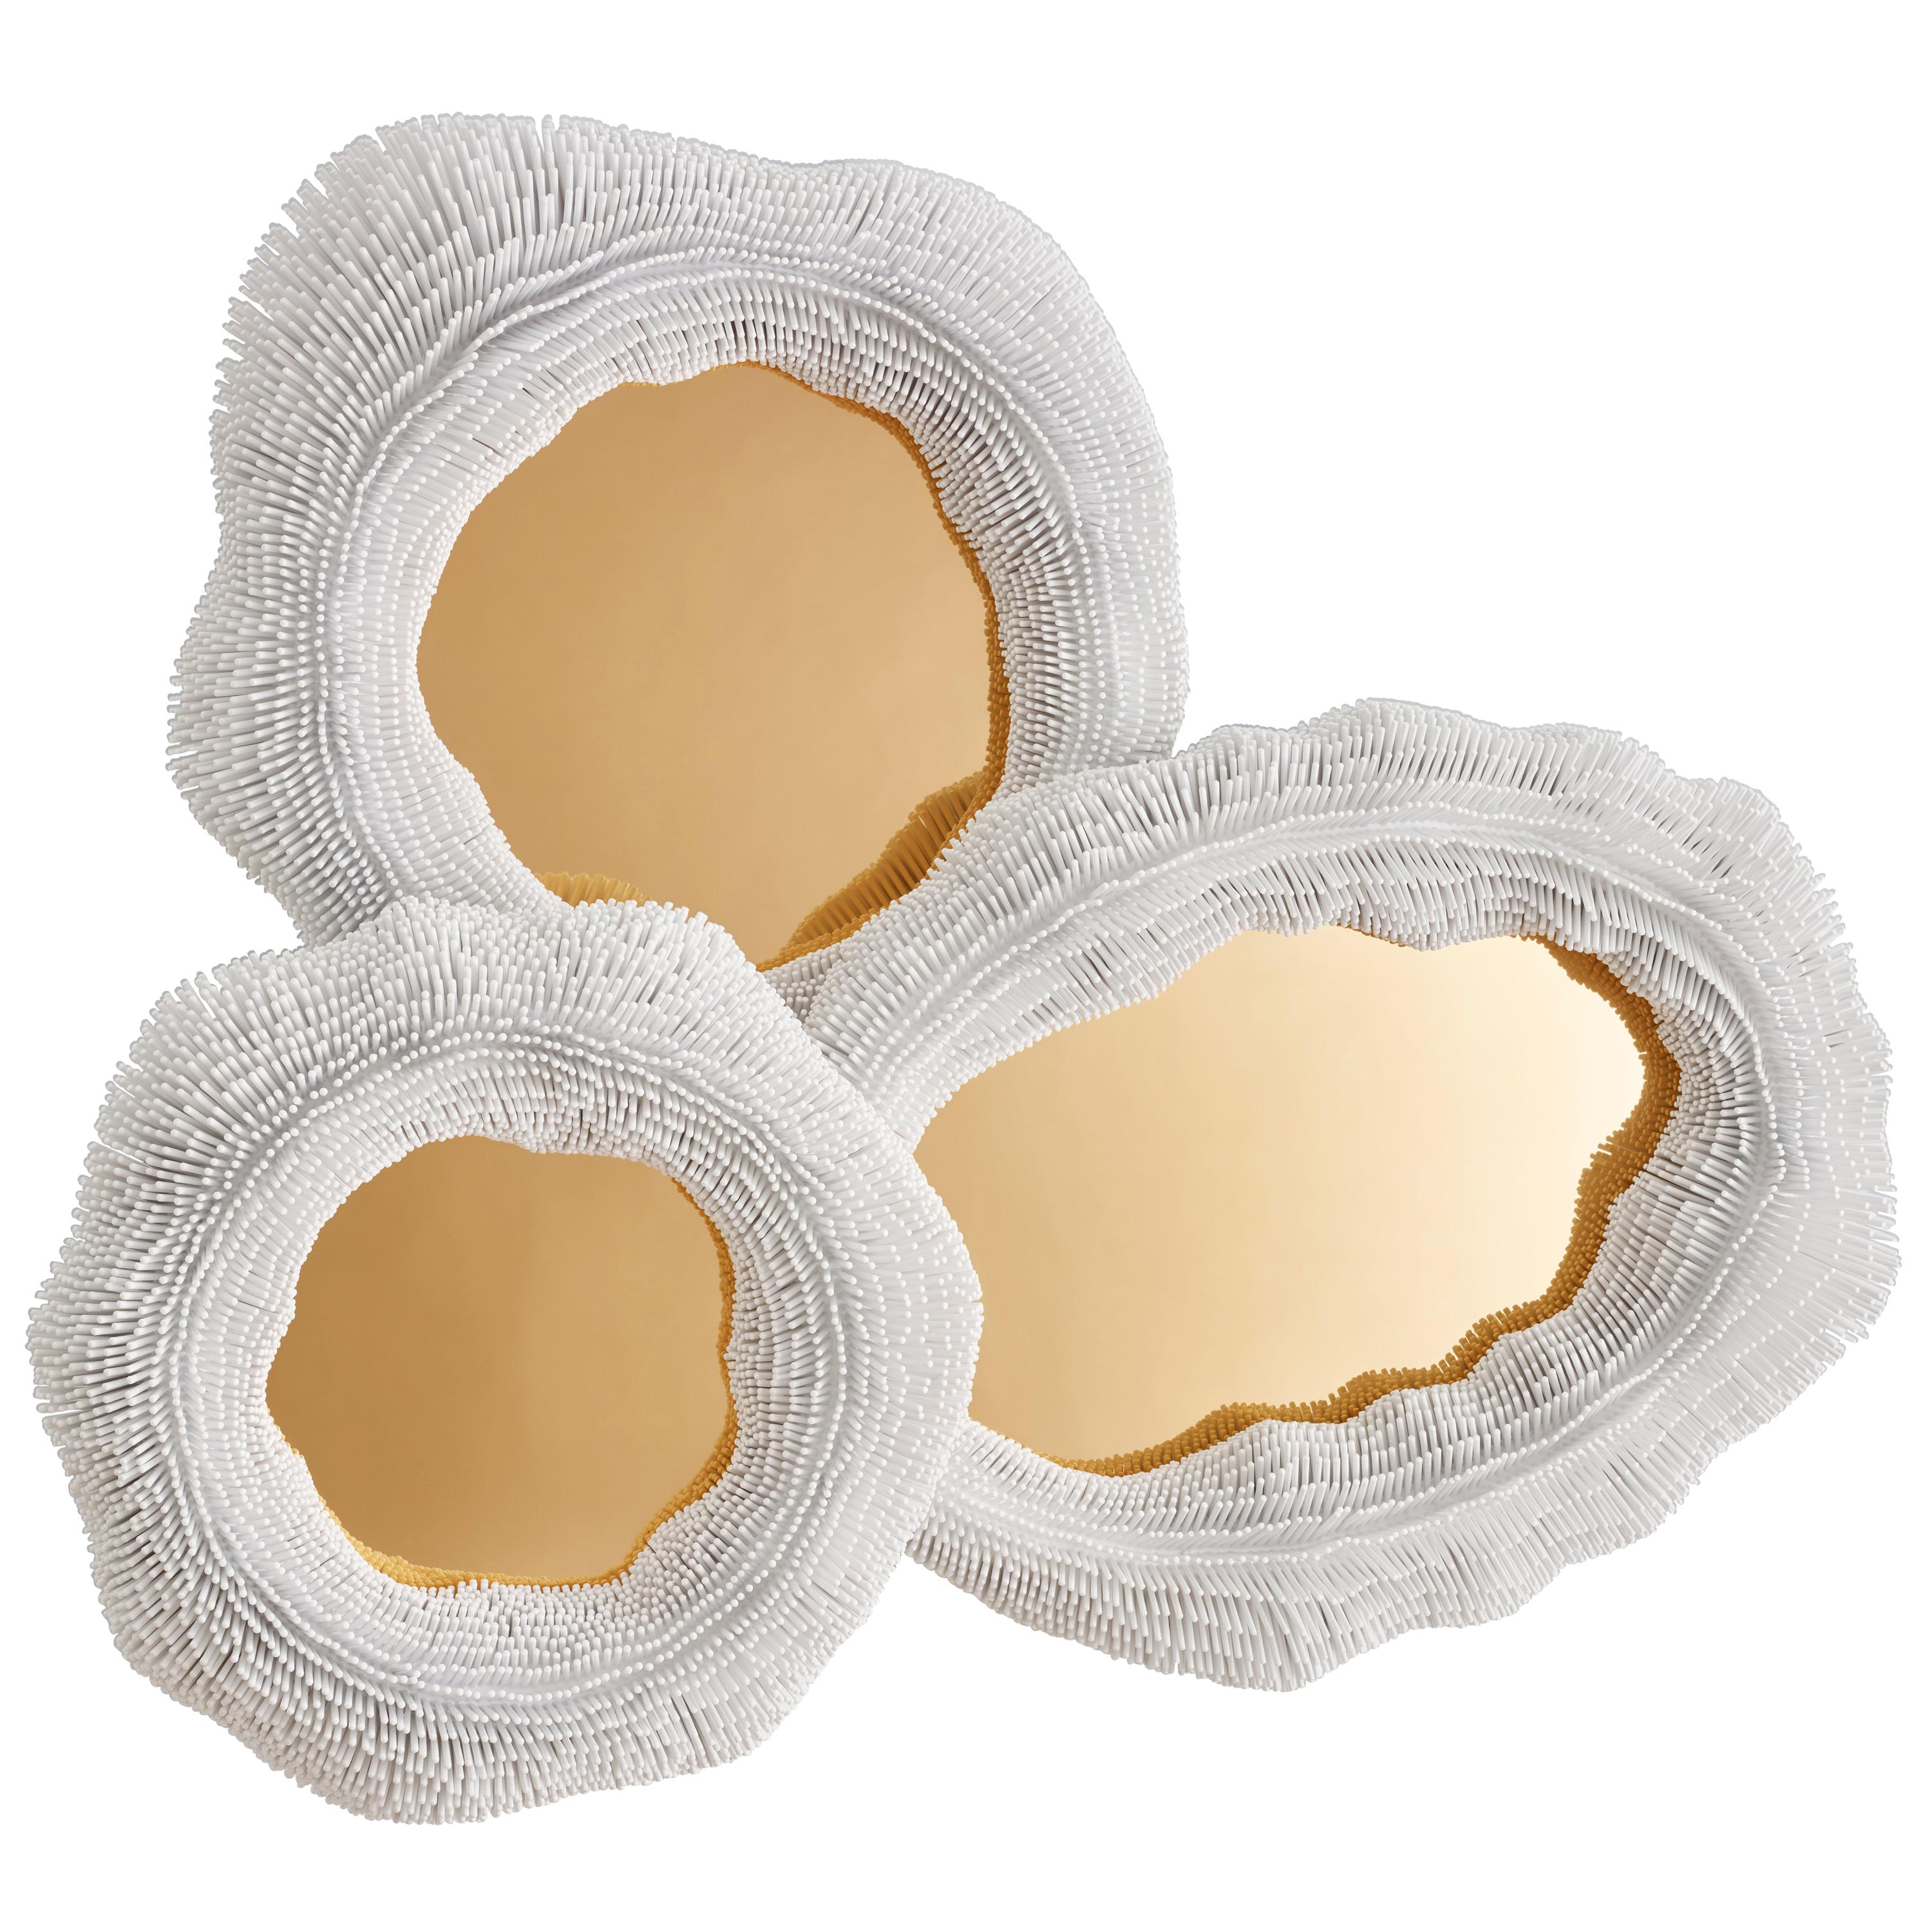 'Sea Anemone' Mirror, includes Three Mirrors Coloured in Gold - Large Size